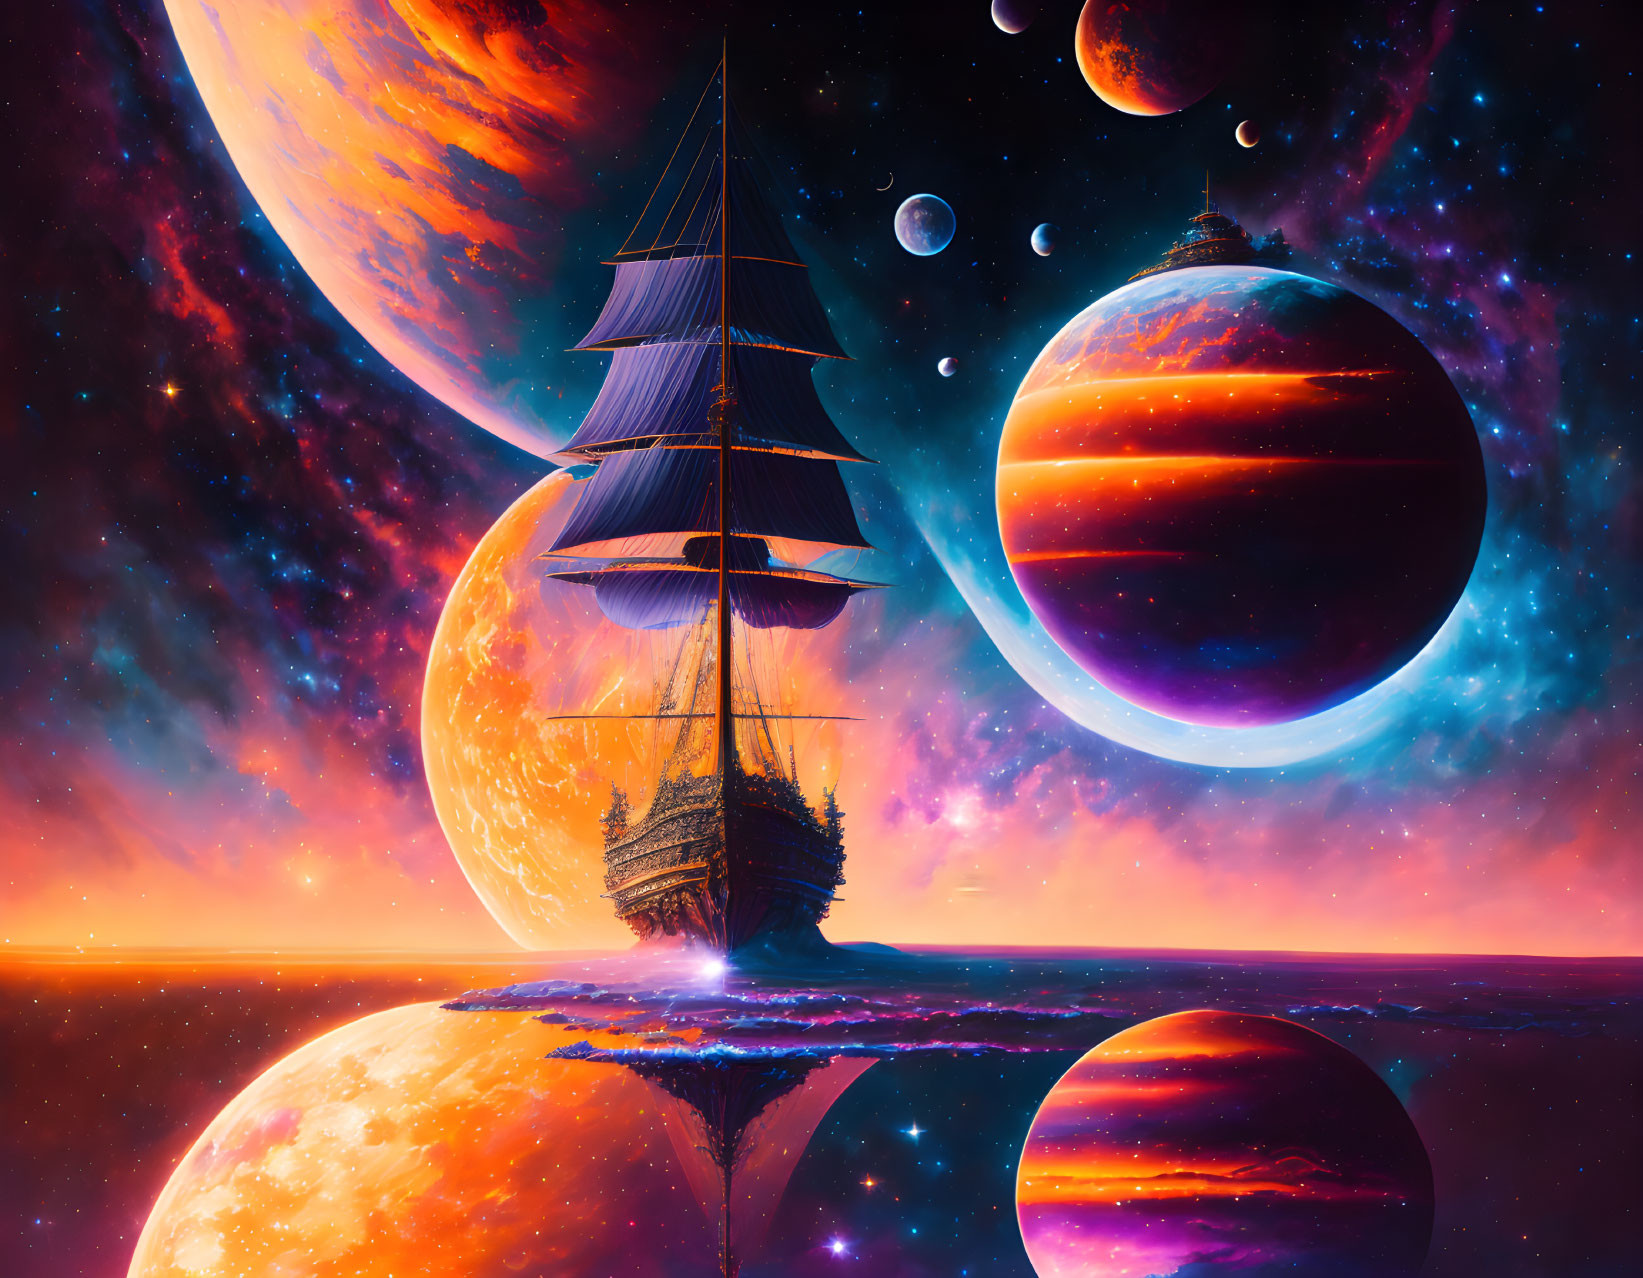 Surreal space fantasy scene with ship sailing on mirror-like surface